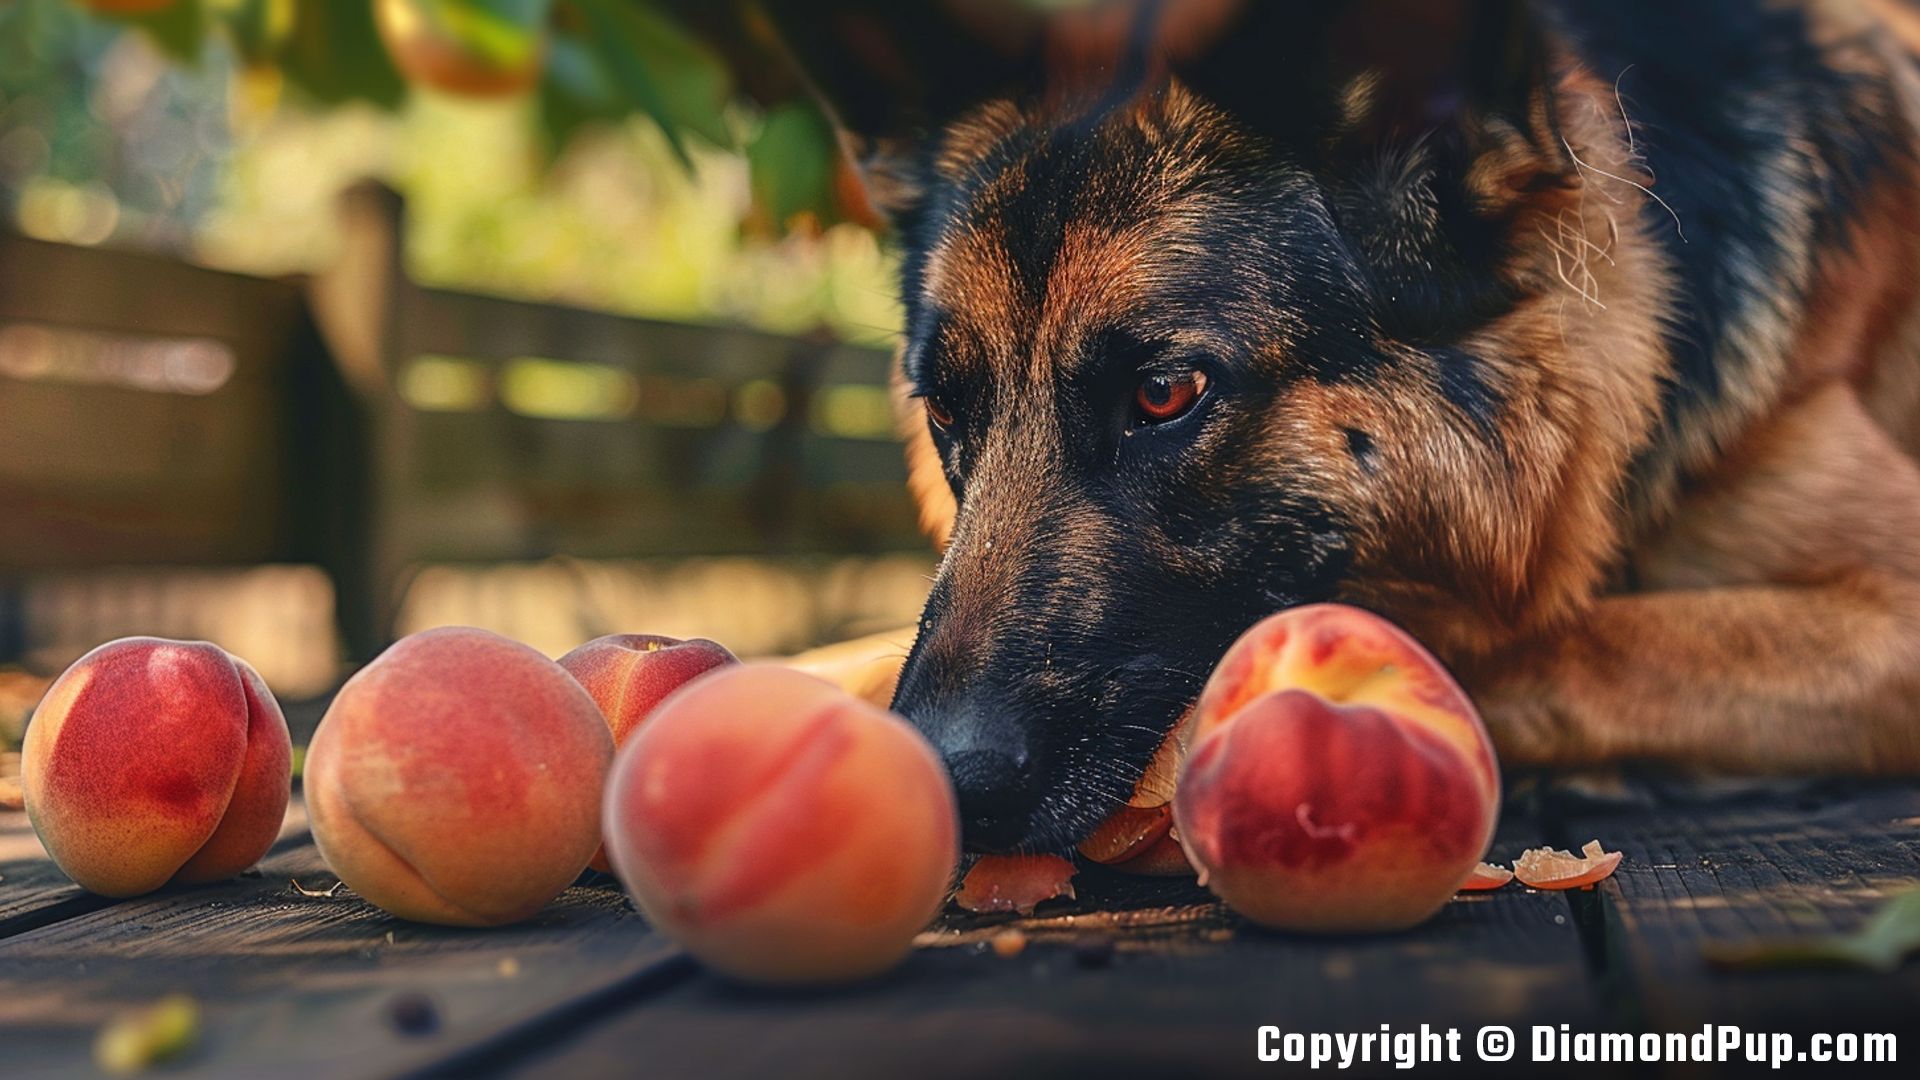 Photograph of an Adorable German Shepherd Snacking on Peaches